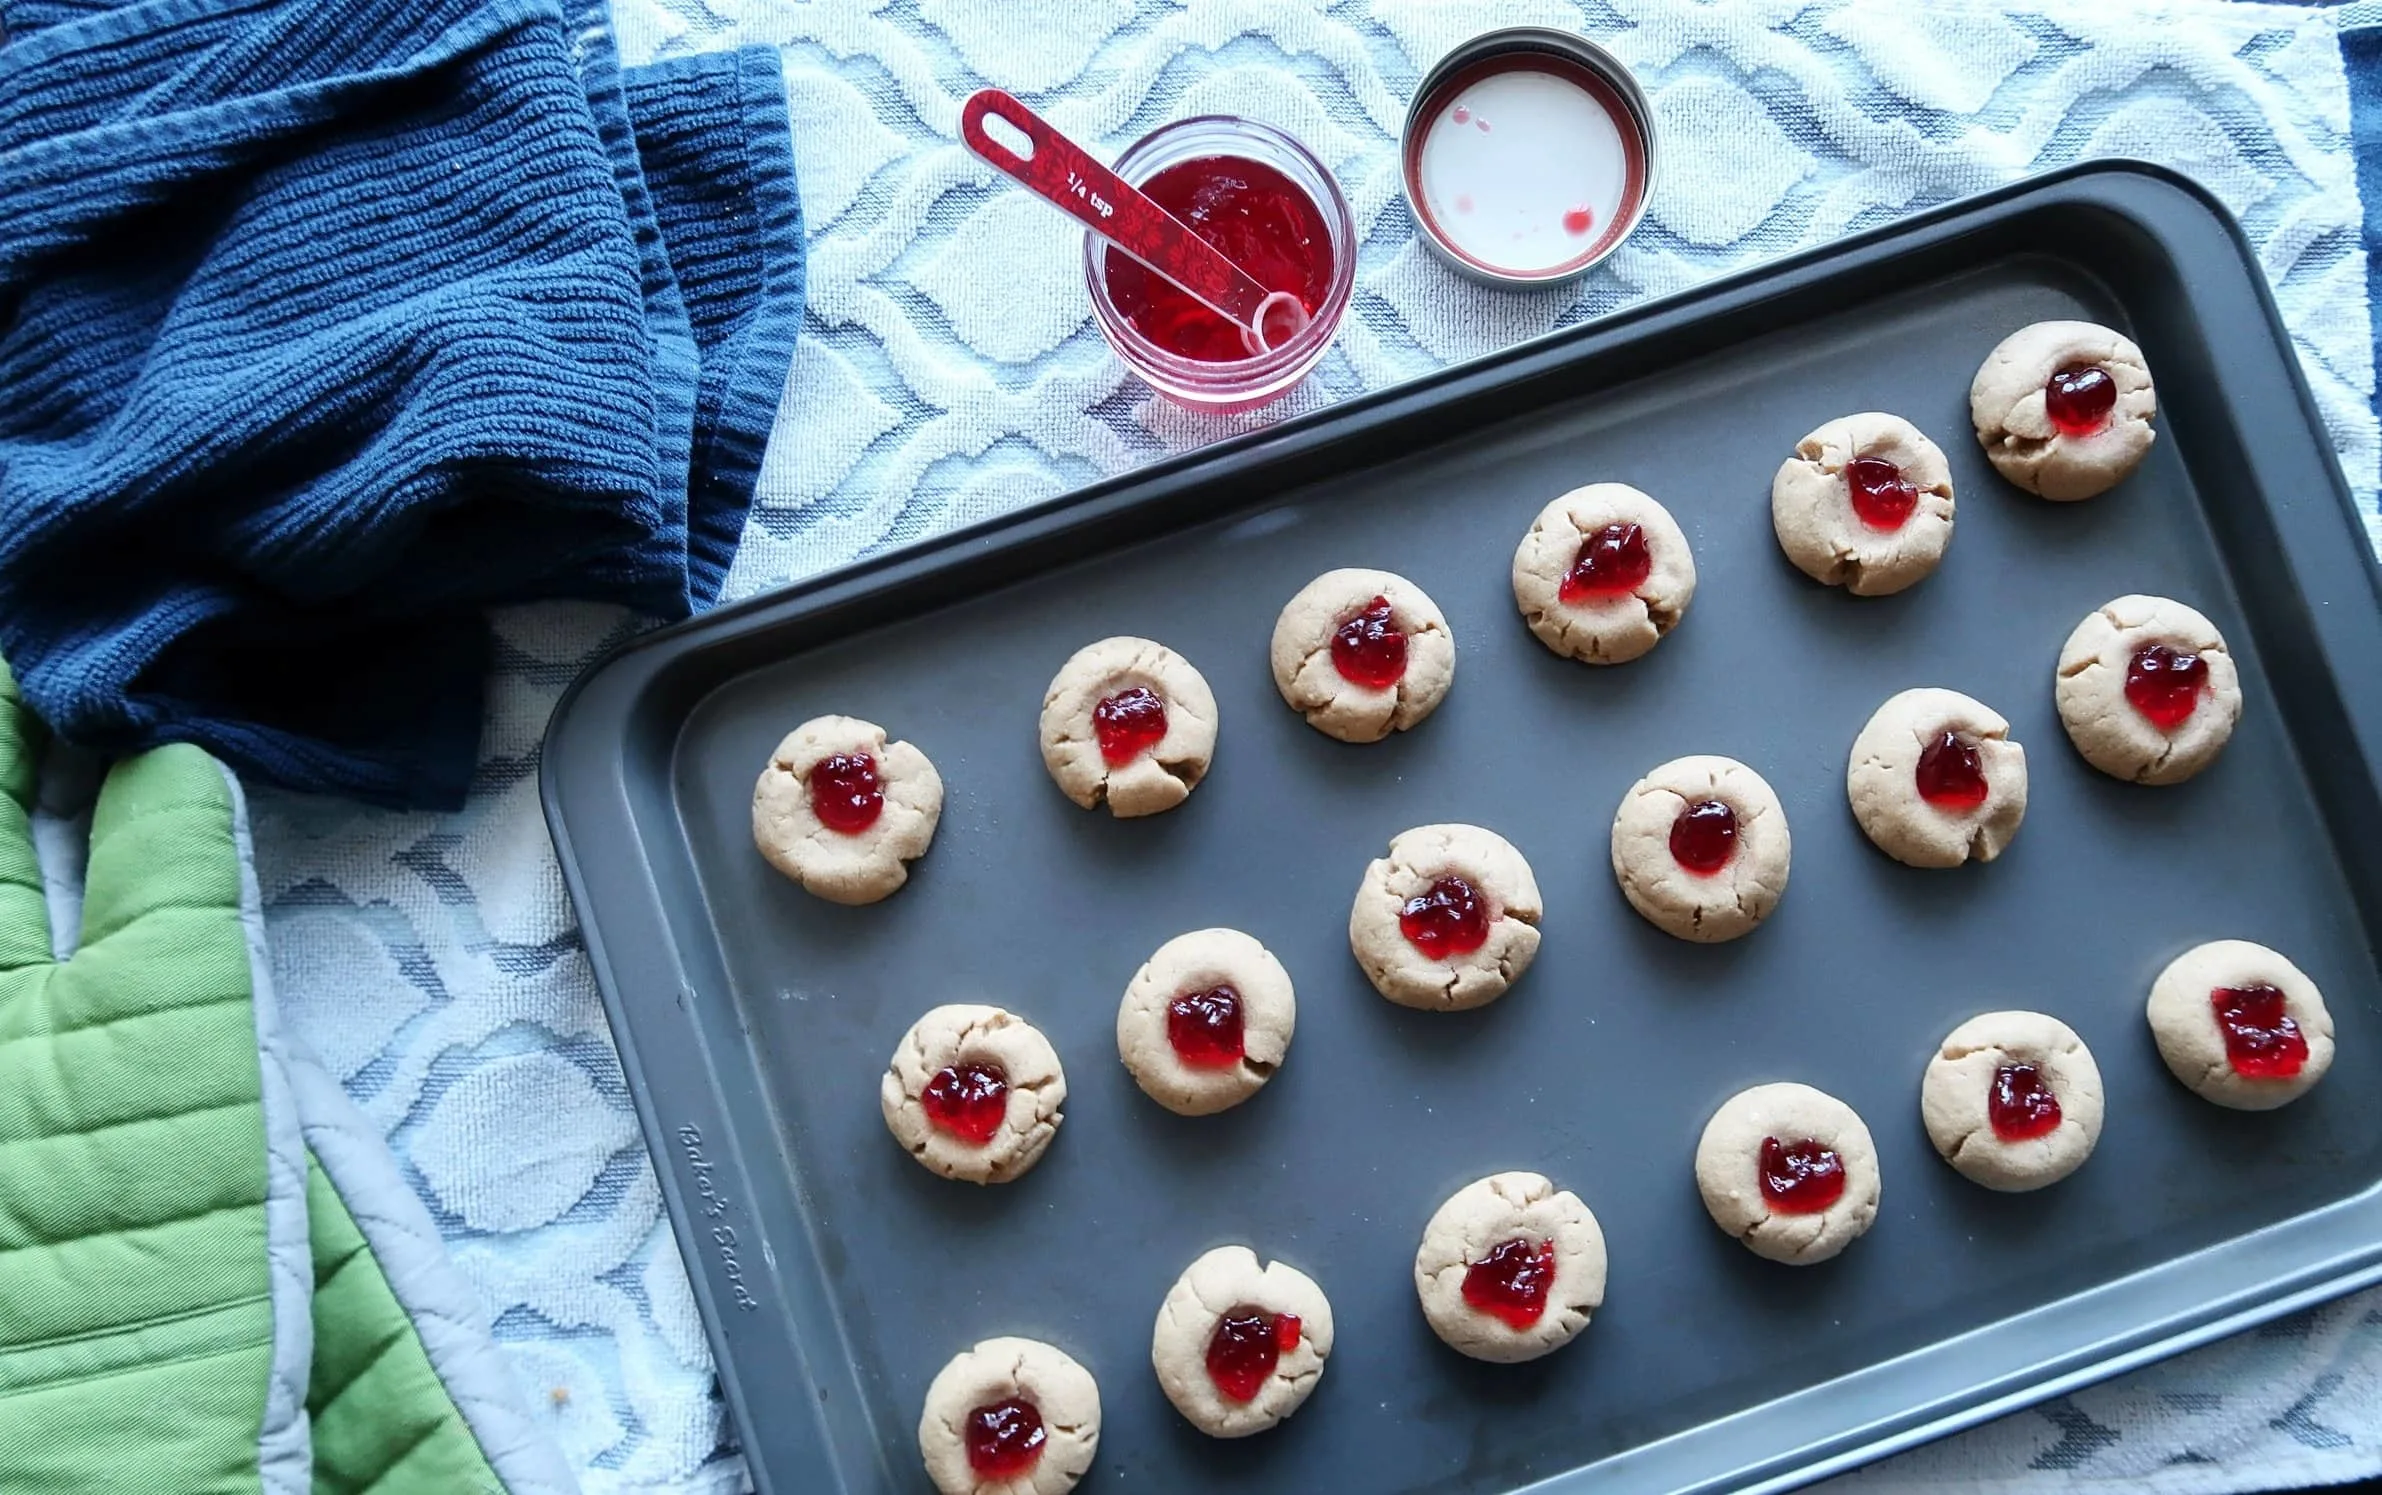 A baking sheet full of Peanut Butter and Jelly Thumbprint Cookies.